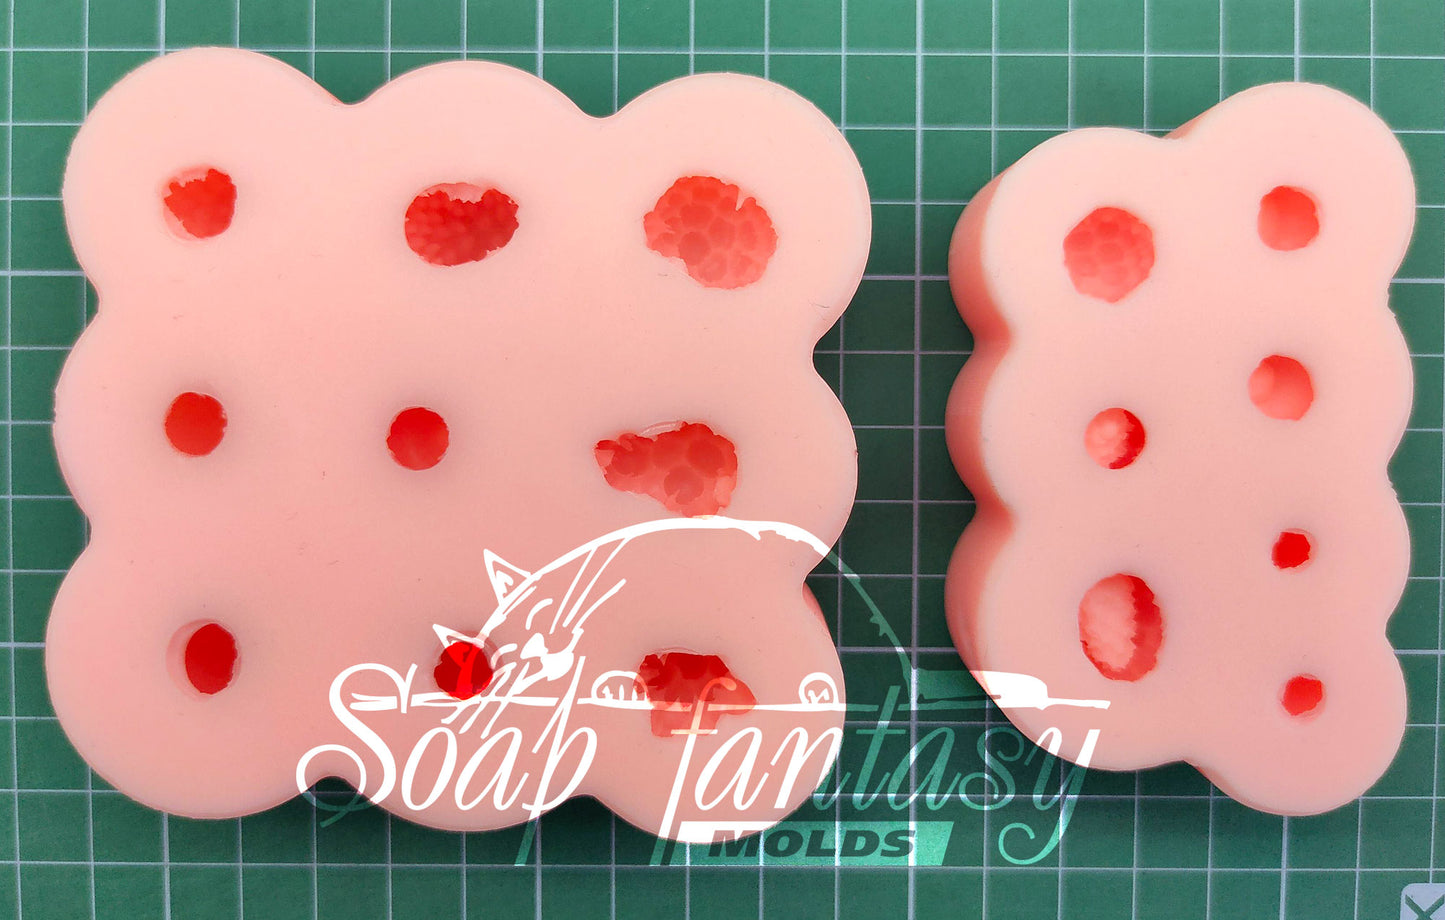 Big custom set of berries silicone mold for soap making